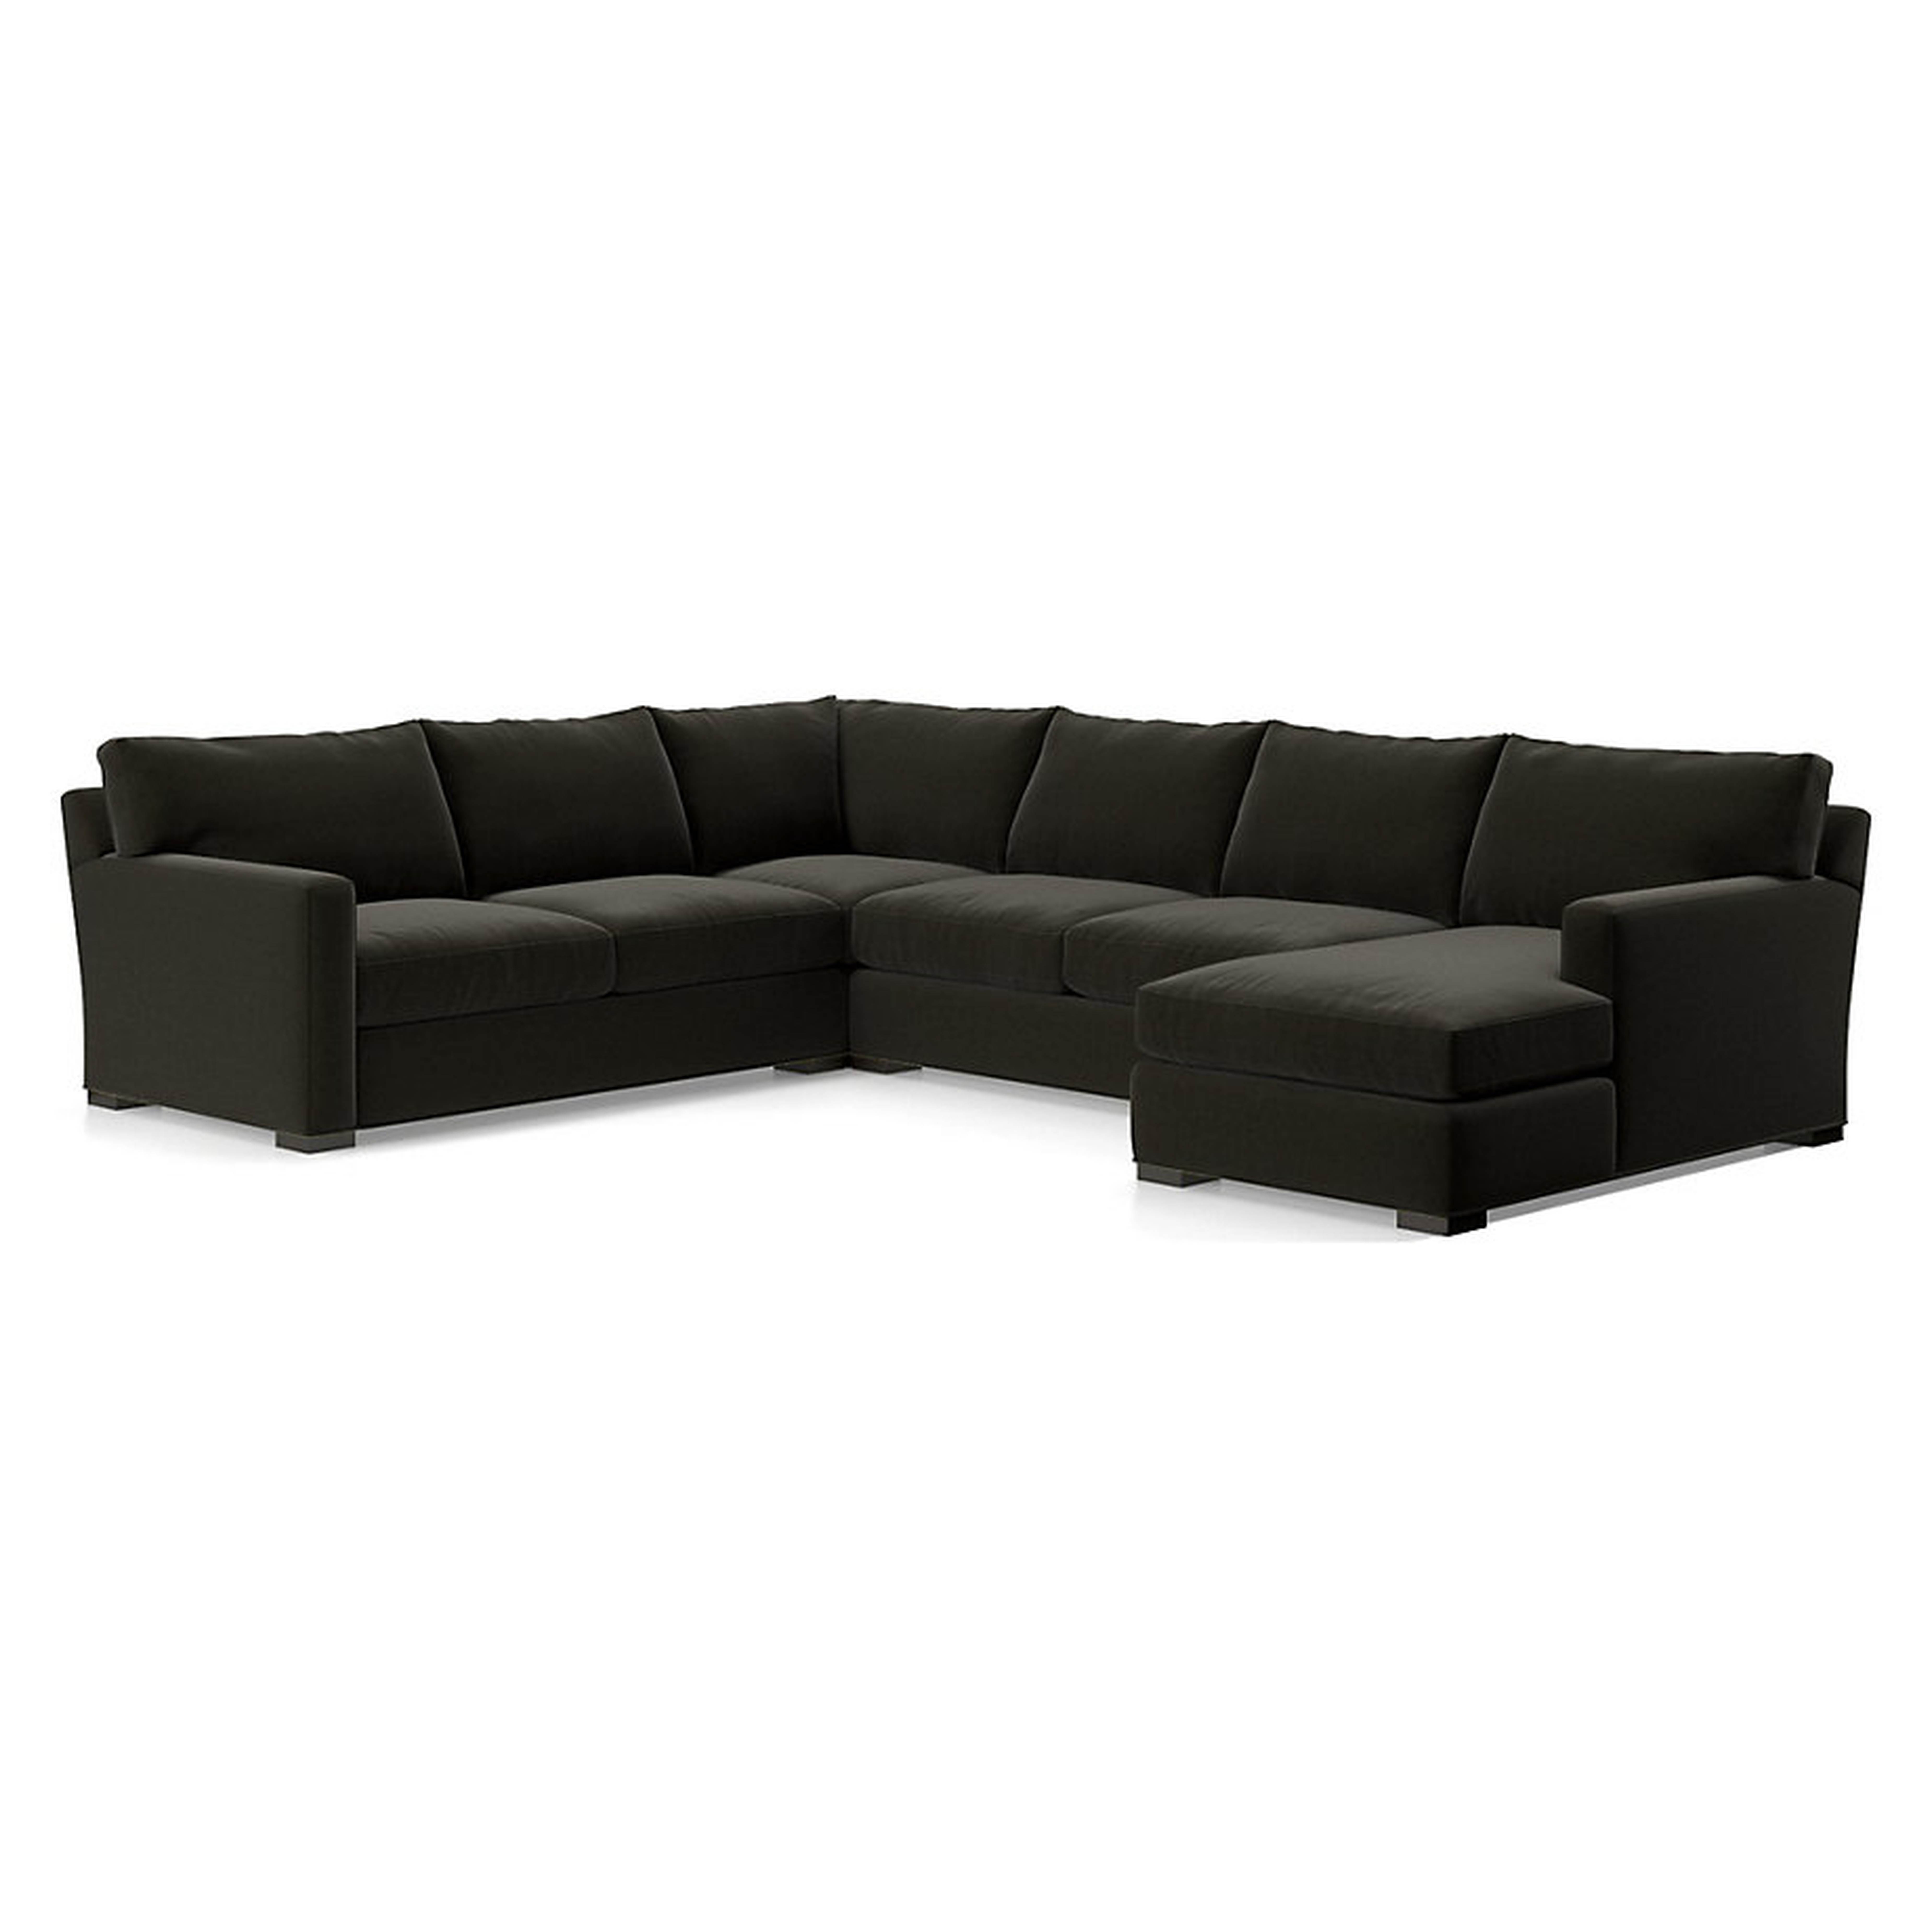 Axis II 4-Piece Sectional Sofa - "View" espresso microfiber - Crate and Barrel